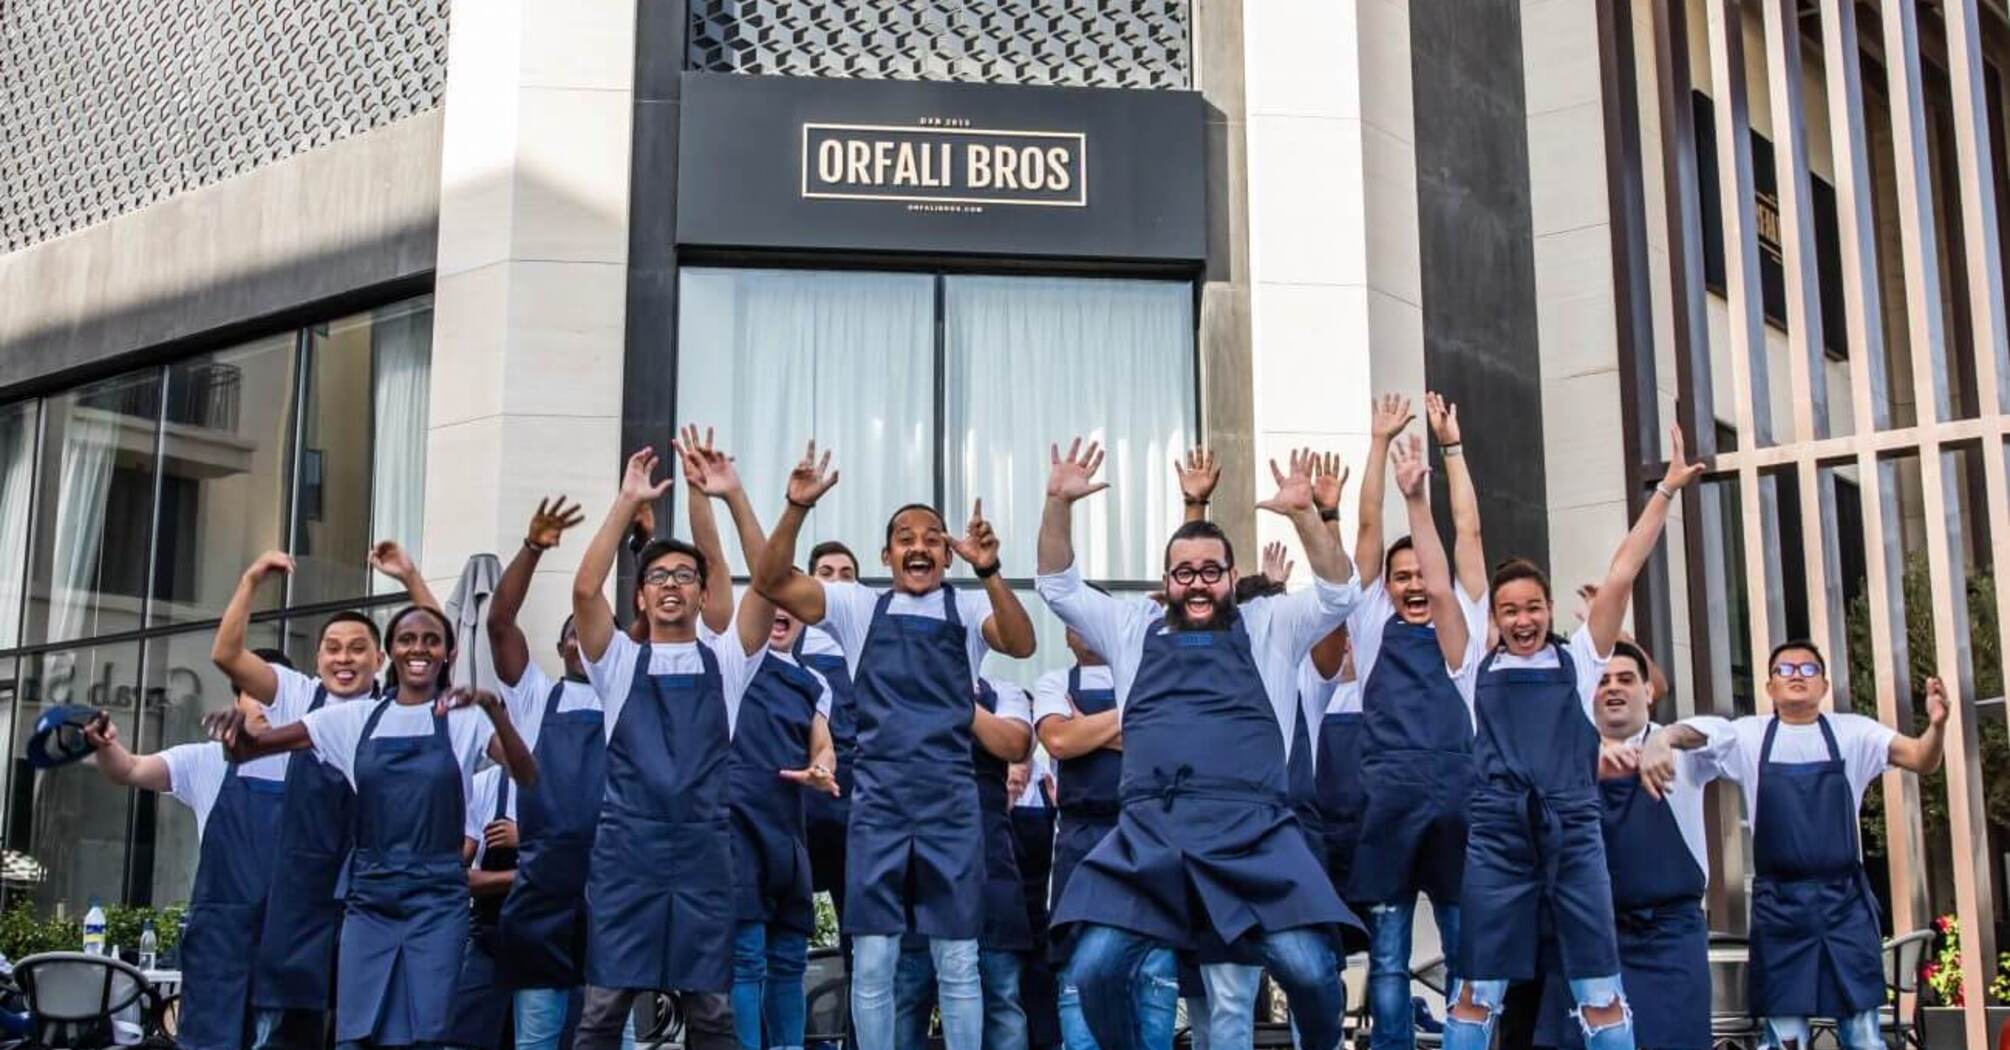 From a family bistro to the best restaurant in the Middle East: what is interesting about Orfali Bros Bistro